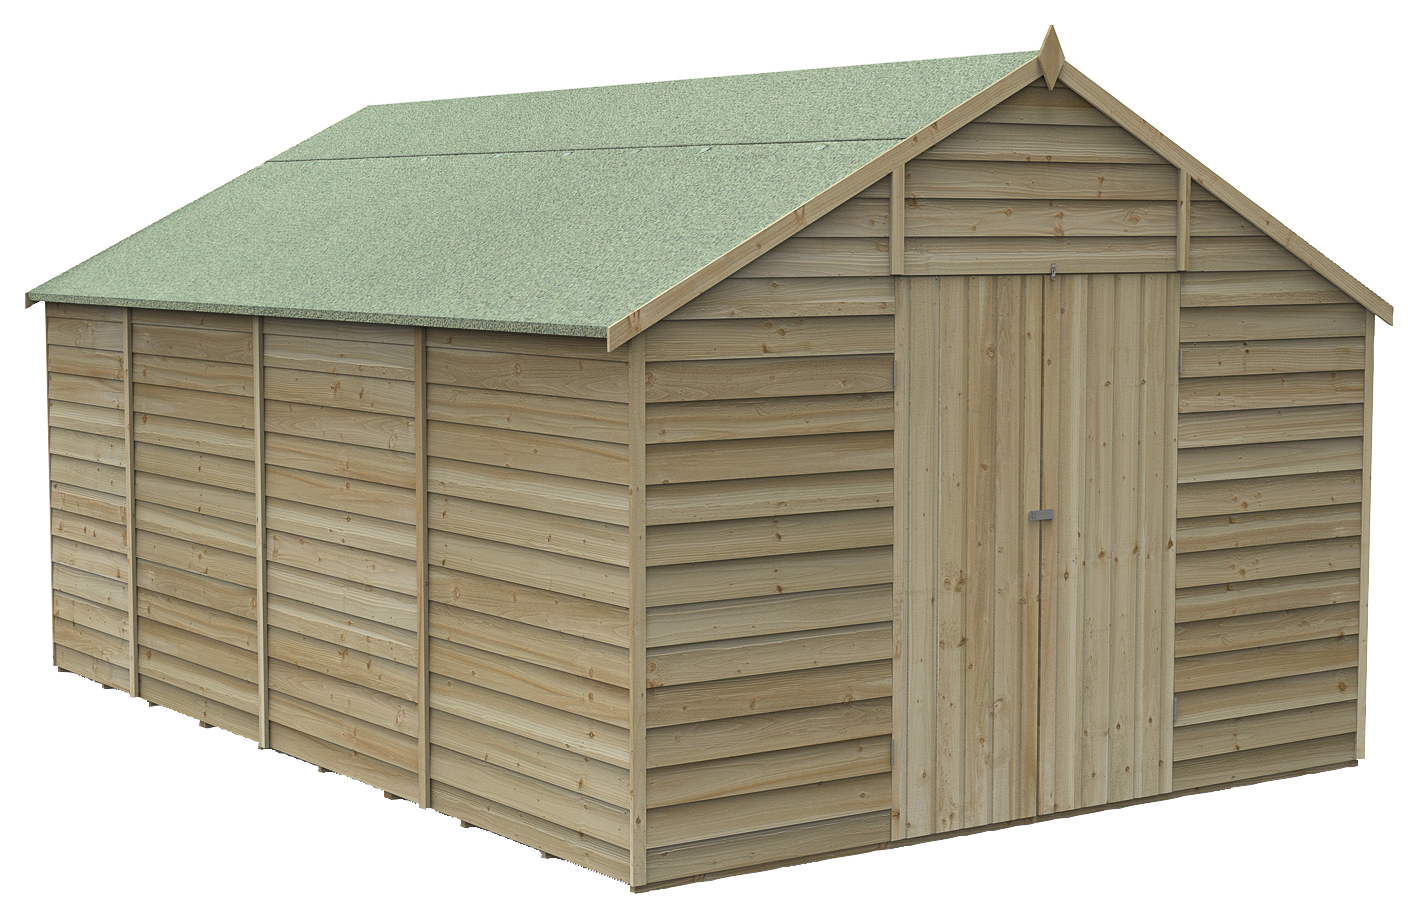 Forest Garden 10 x 15ft 4Life Apex Overlap Pressure Treated Double Door Windowless Shed with Base